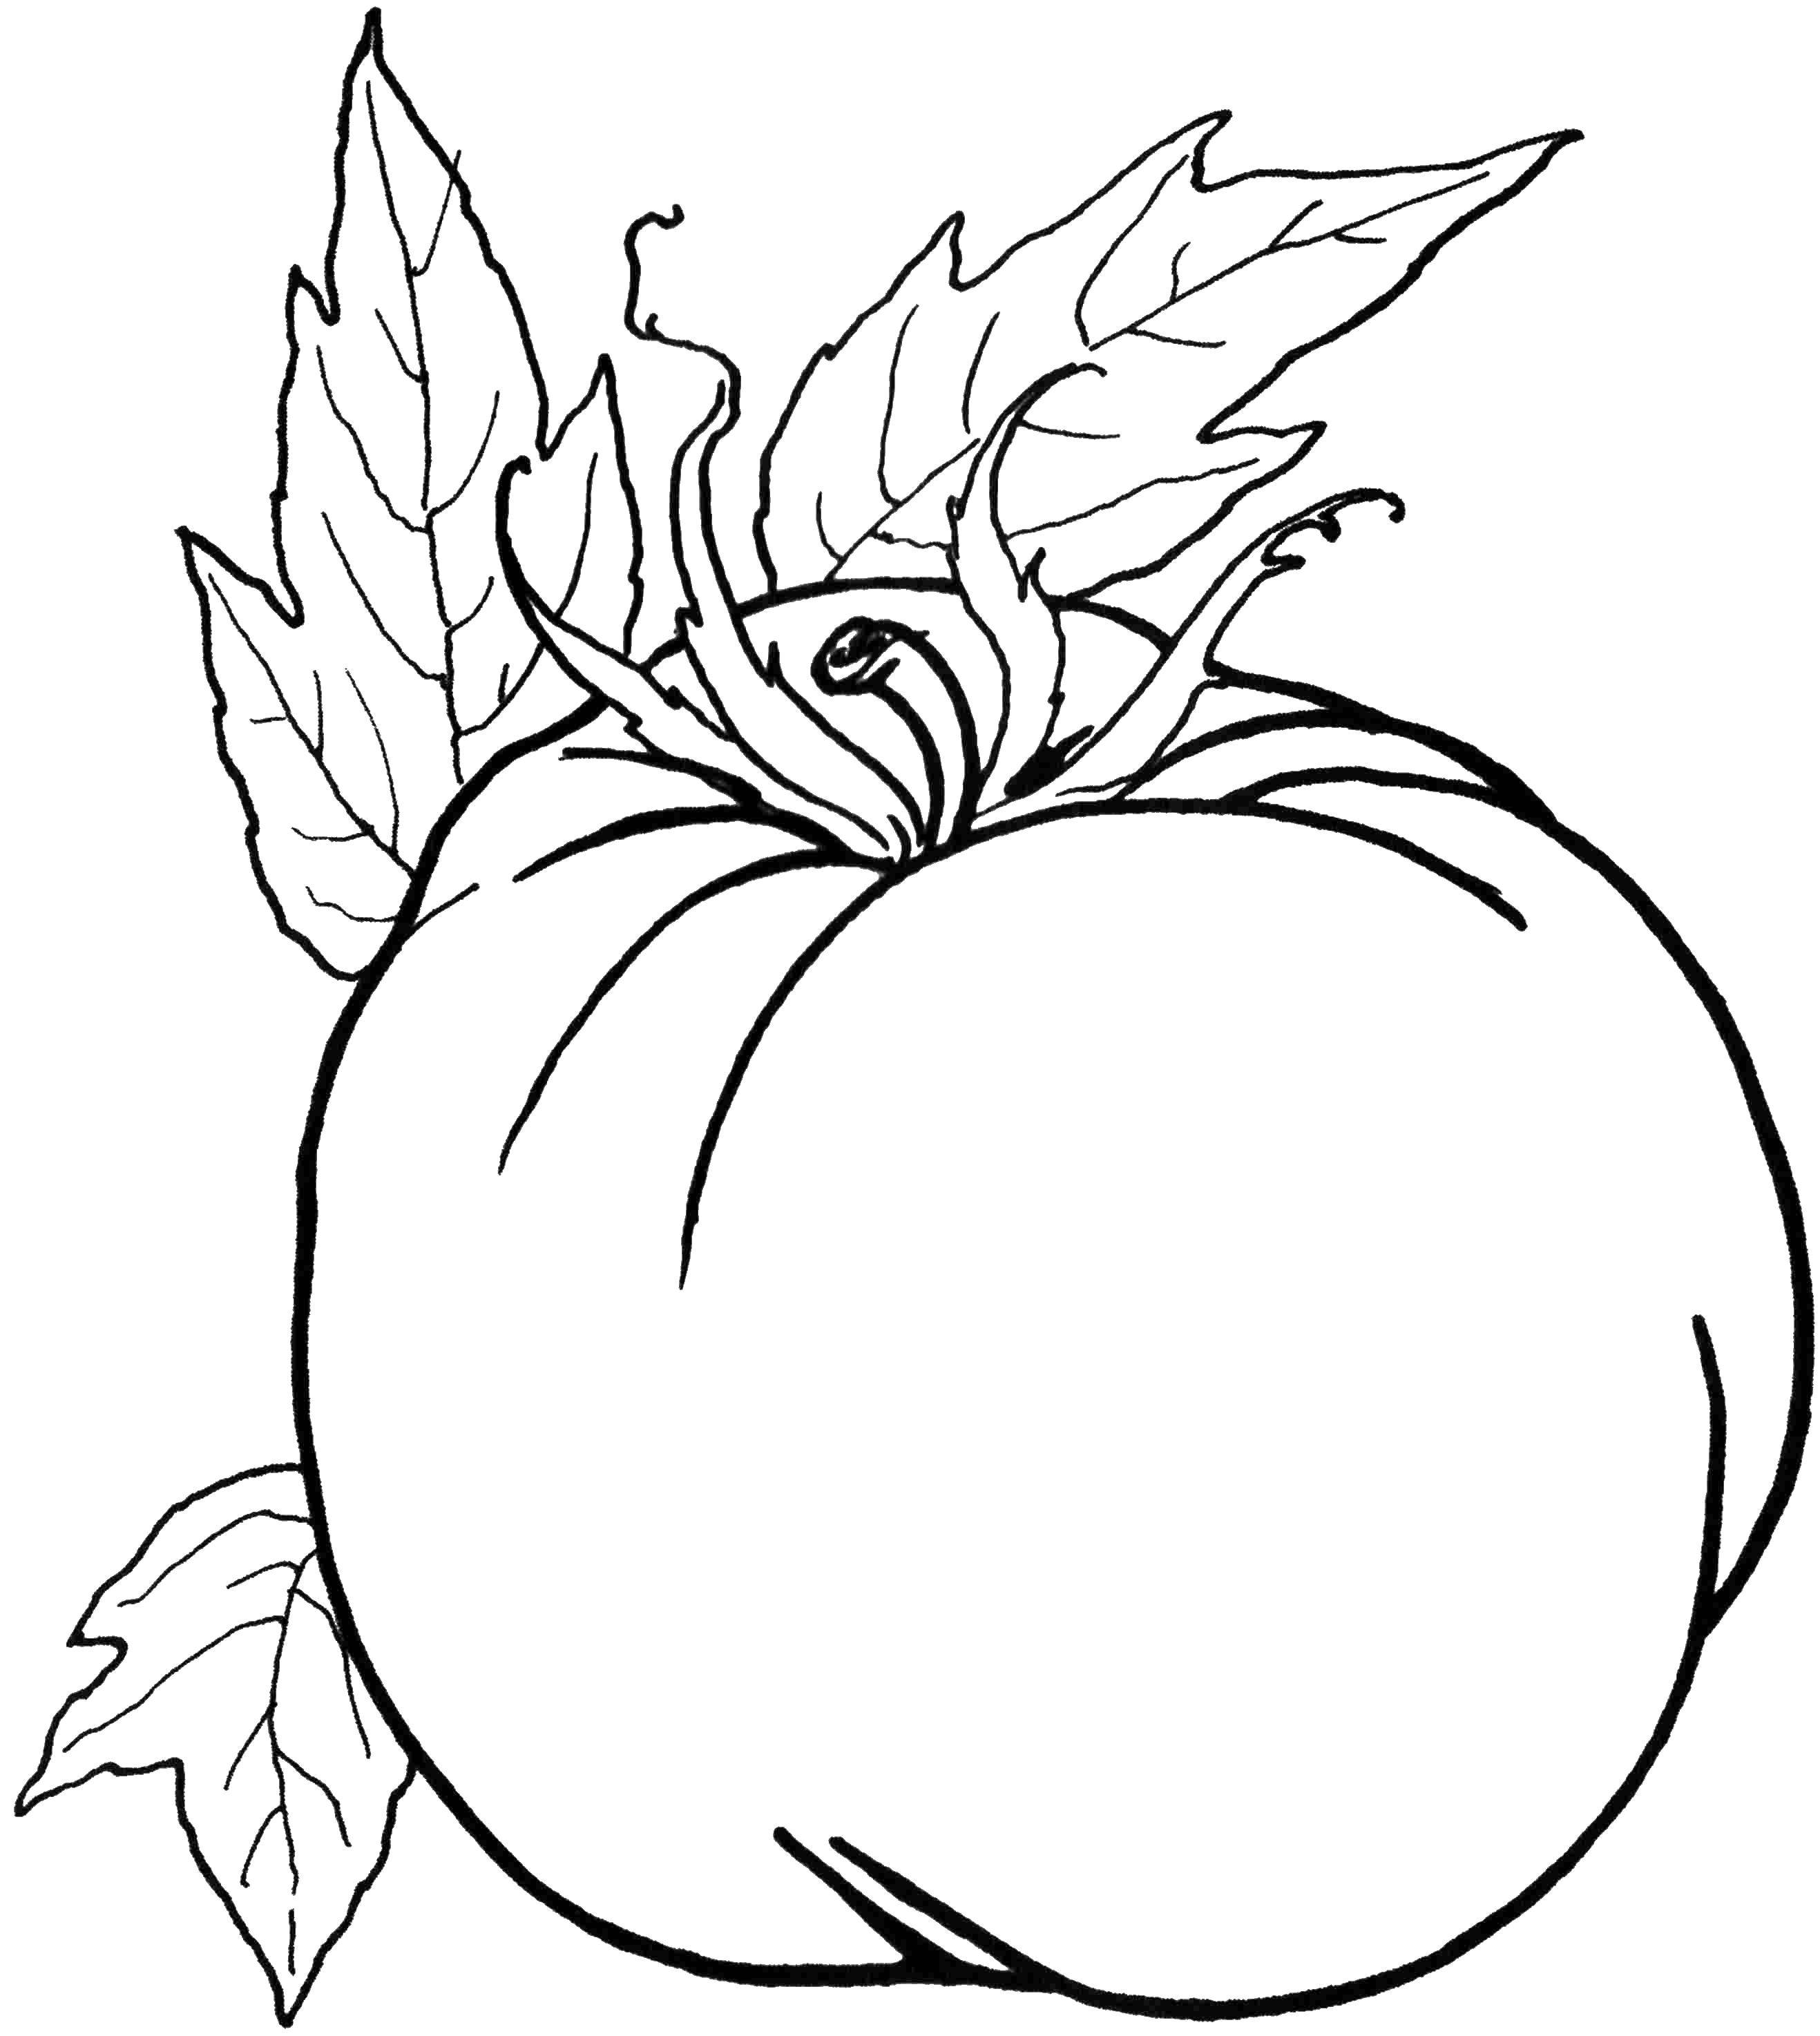 Coloring Tomatoes. Category Vegetables. Tags:  vegetables, tomatoes, tomatoes.